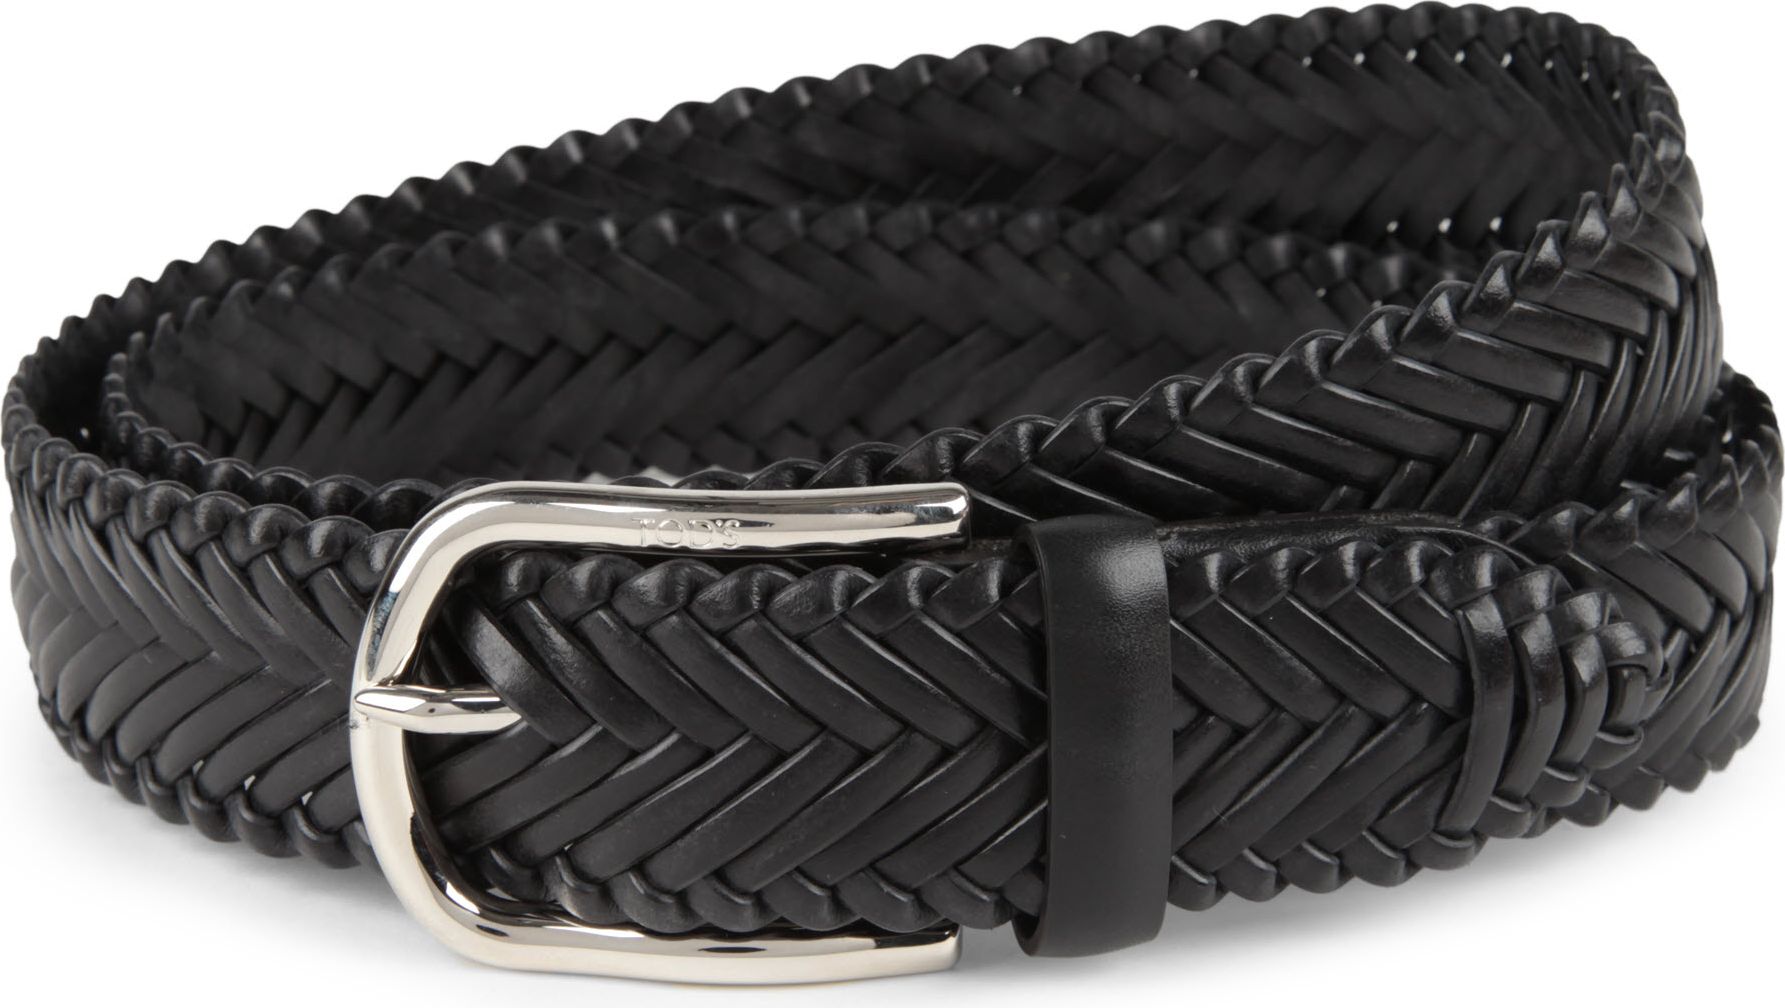 Tod's Woven Leather Belt in Black for Men - Lyst